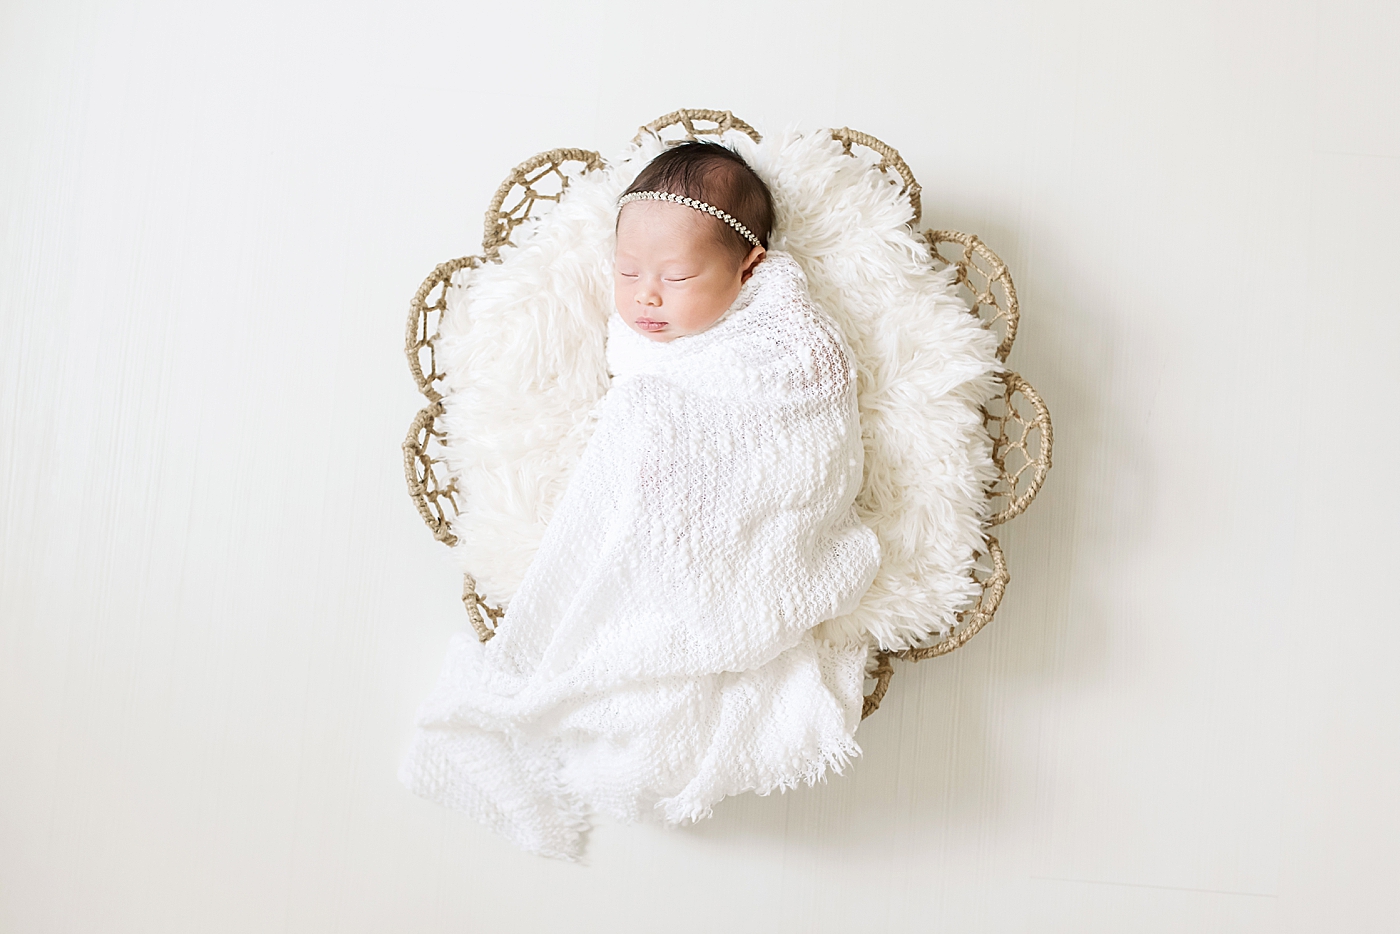 Newborn studio session for baby girl wrapped in white blanket | Photo by Anna Wisjo Photography